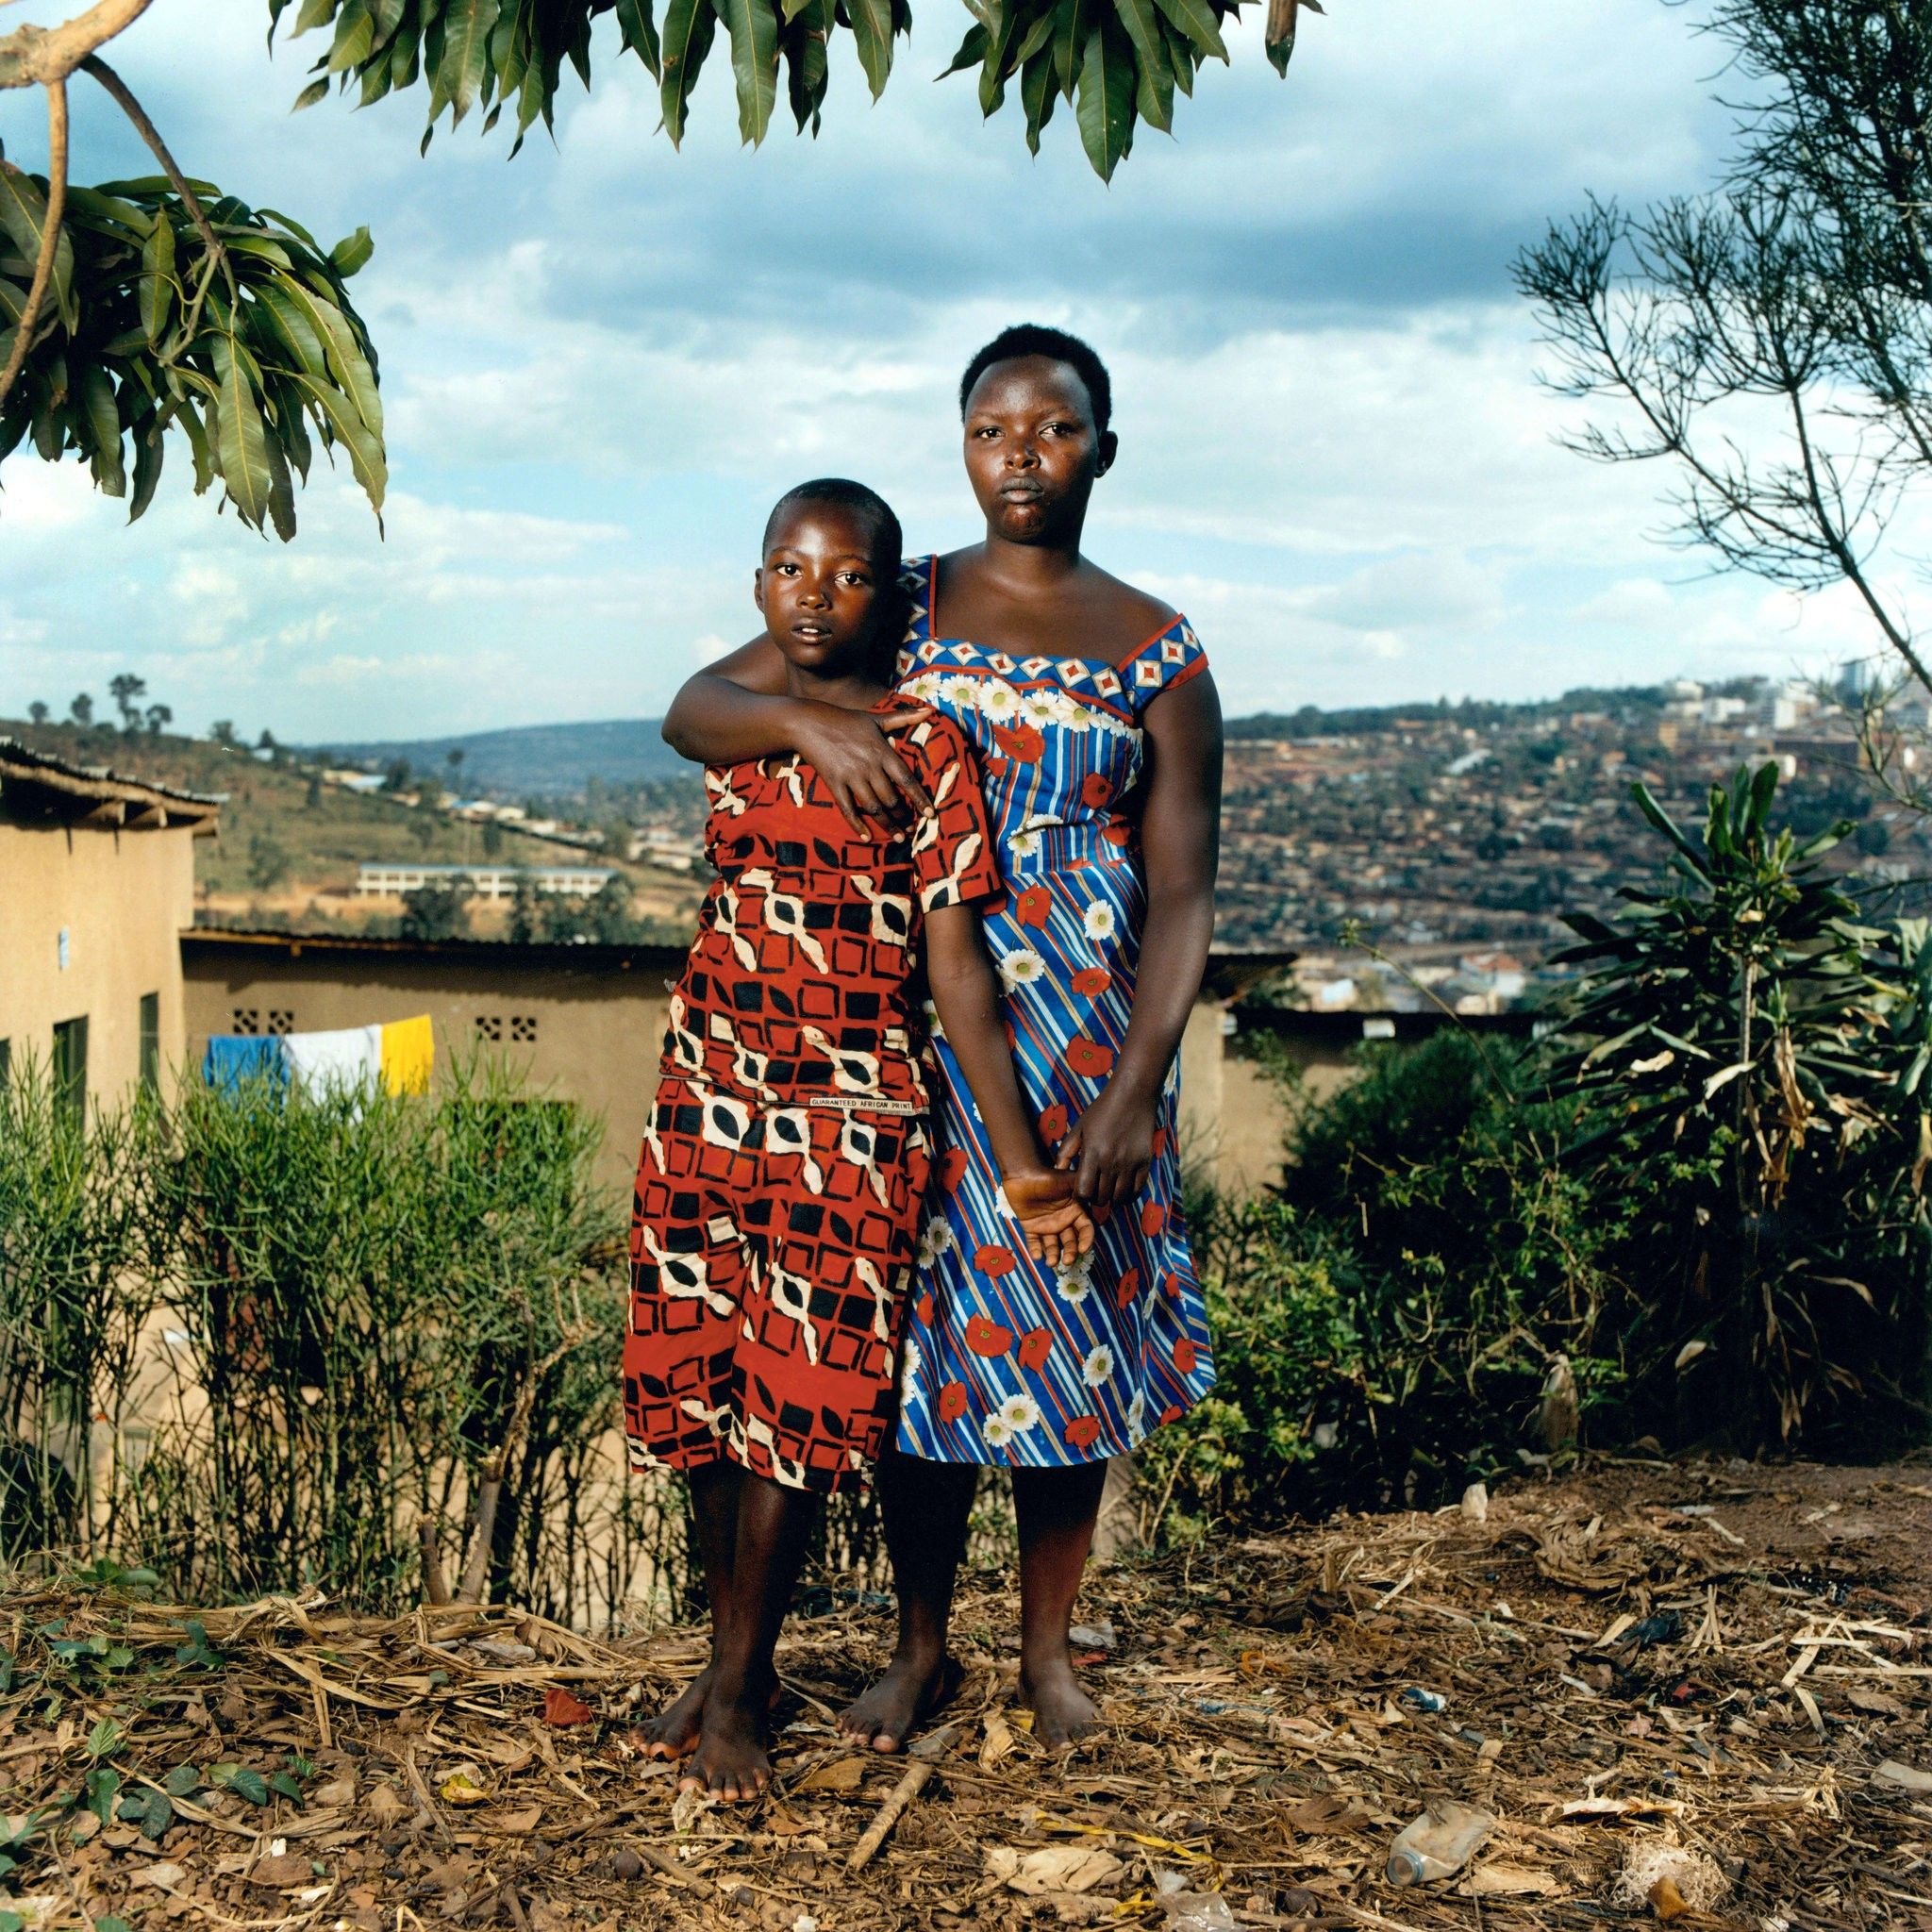 Josette, 40, and her son Thomas, 24: Josette was beaten and raped by militiamen. After the genocide, a pregnant Josette was rejected by members of her family. Thomas is now training to be a plumber. Image by Jonathan Torgovnik. Rwanda, 2006